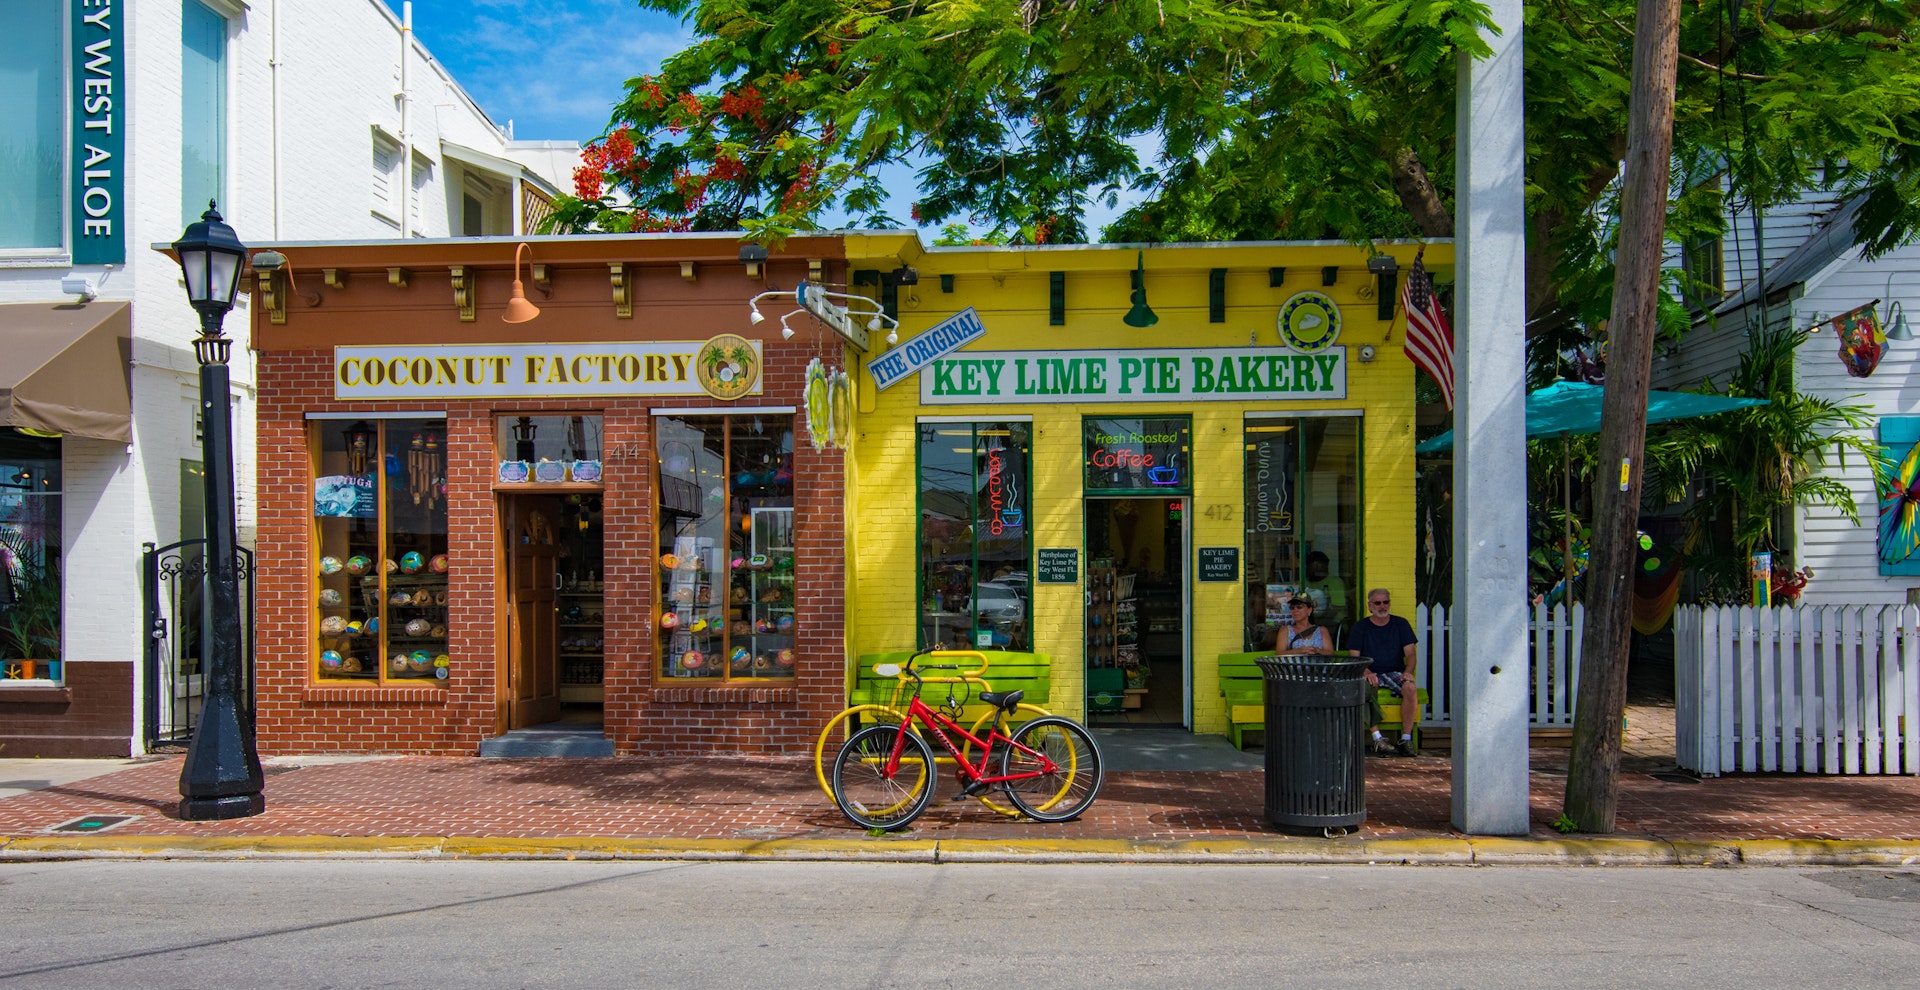 Colorful storefronts named Coconut Factory and Key Lime Pie Bakery with two bicycles parked in front